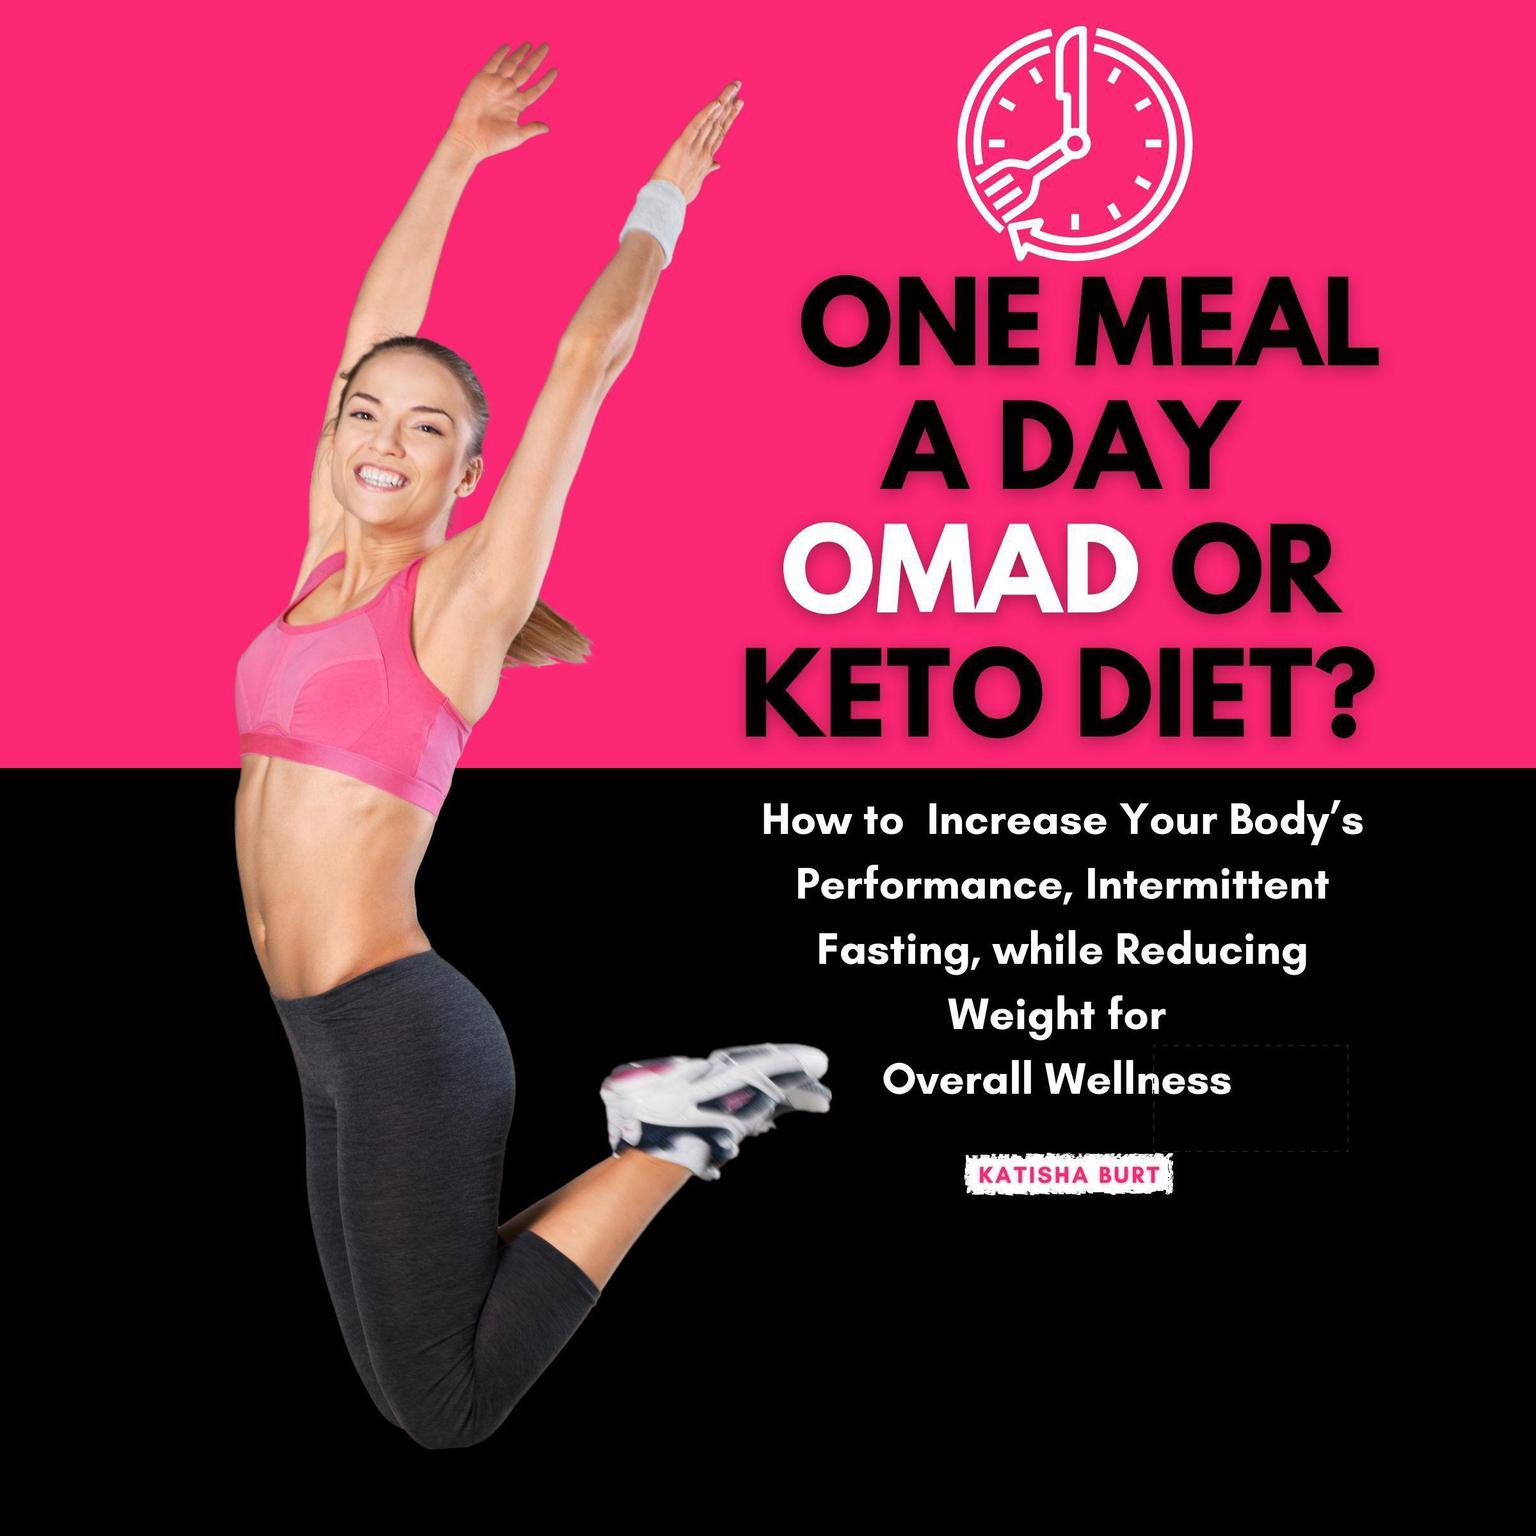 One Meal a Day Omad or Keto Diet (Abridged): How to Improve Your Body’s Performance, Intermittent Fasting, While Reducing Weight for Overall Wellness Audiobook, by Katisha Burt